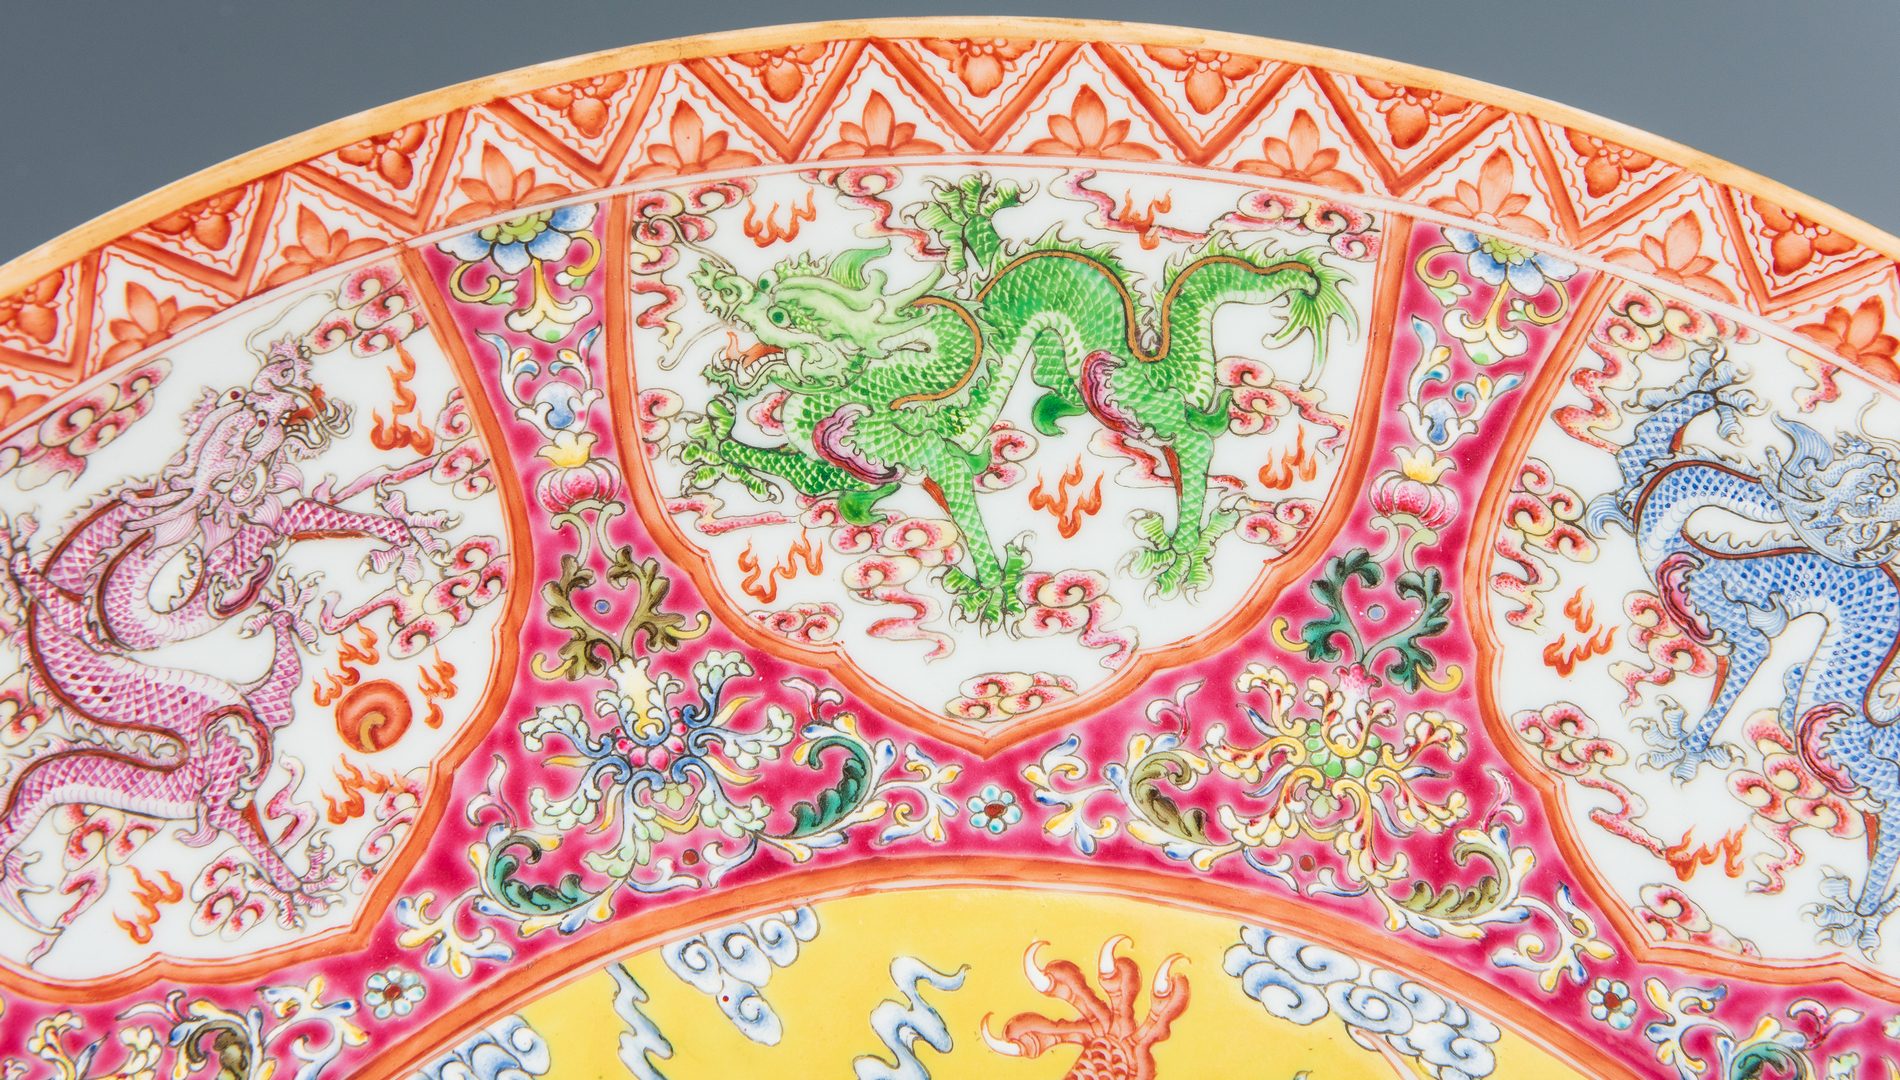 Lot 19: Lg. Chinese Famille Rose Charger, 20th century.